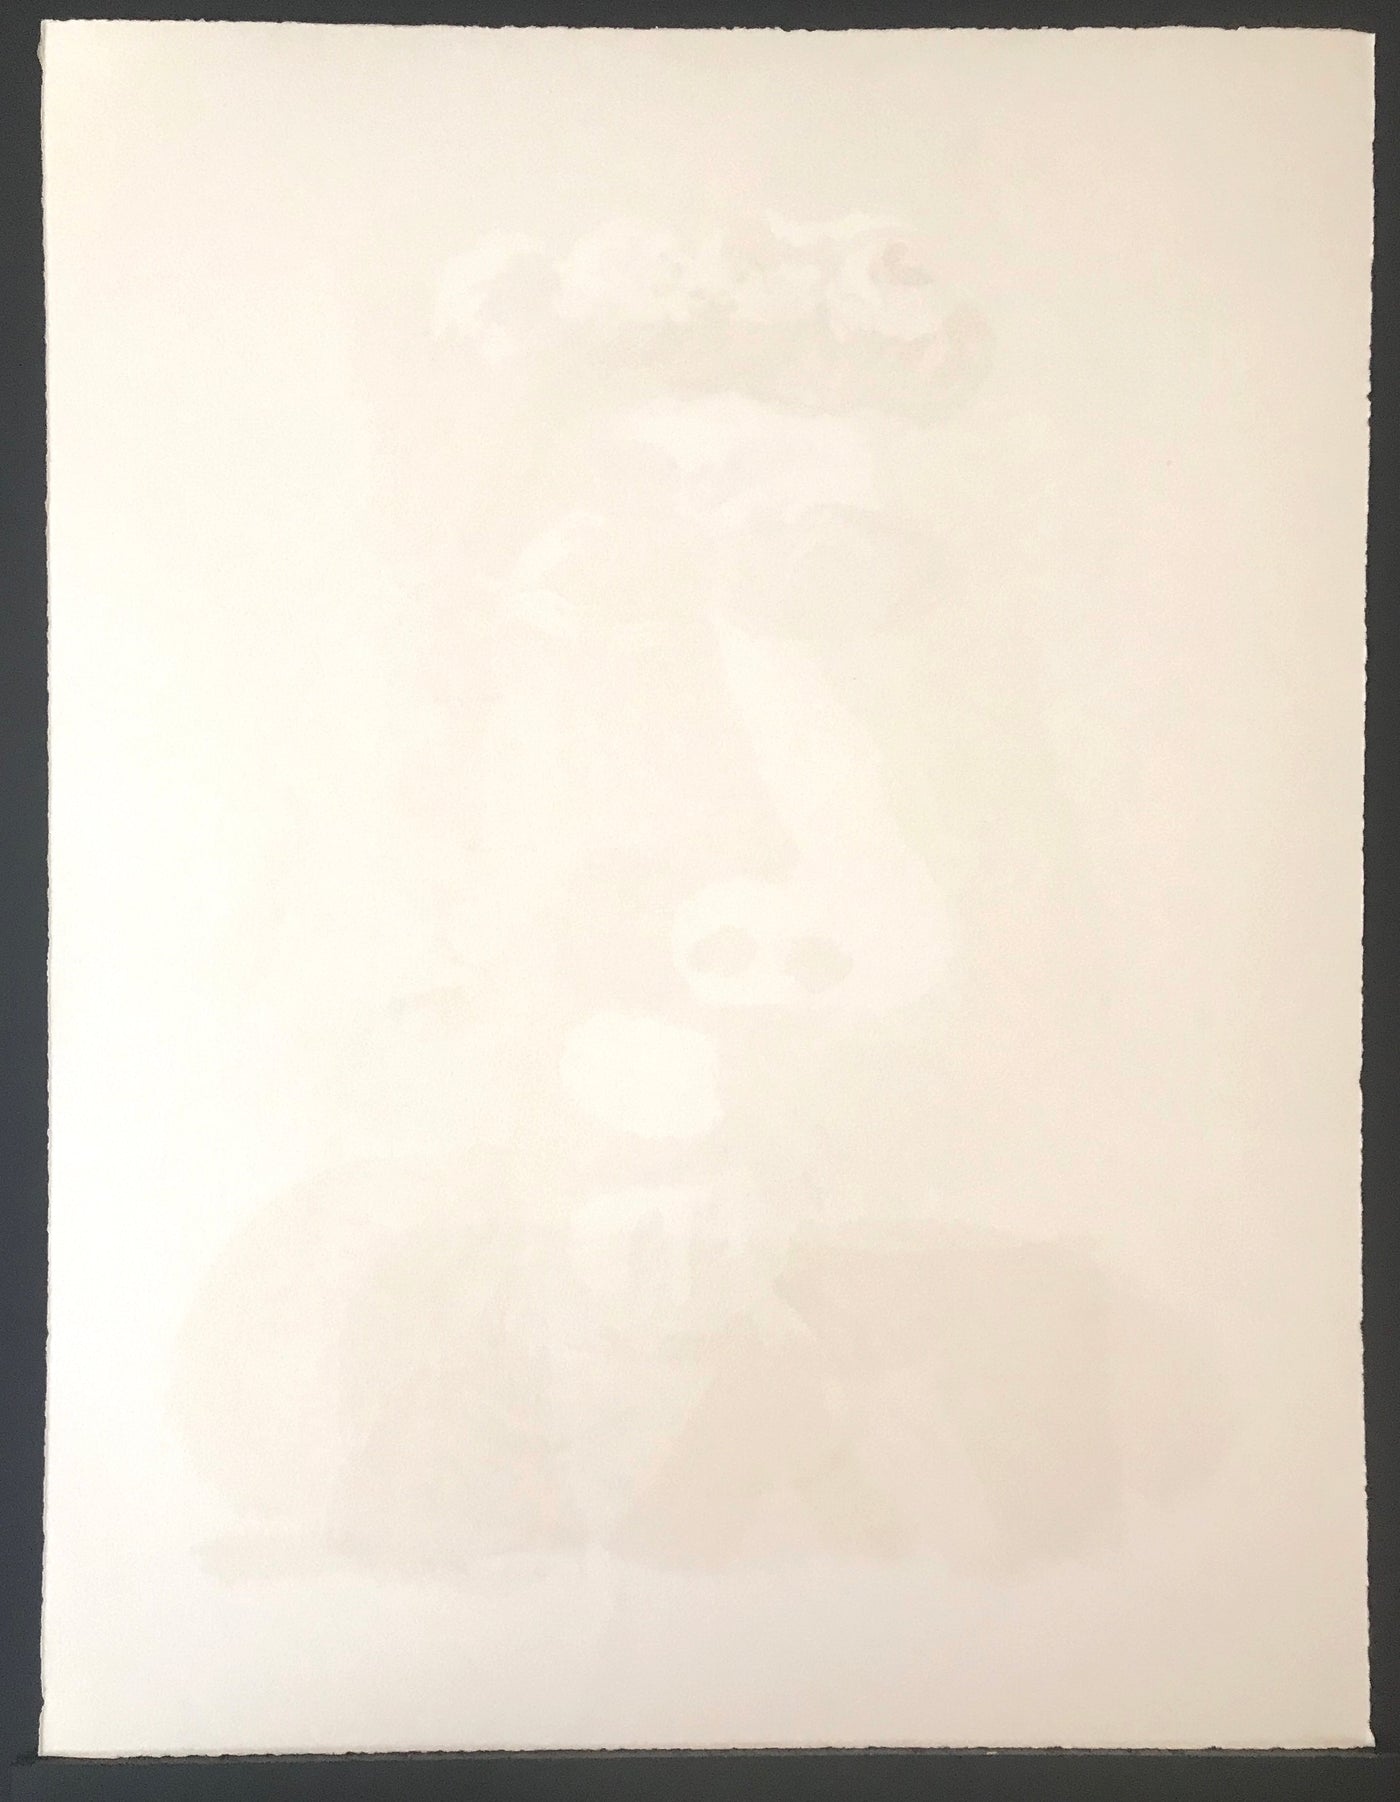 Pablo Picasso (after) 30.1.69 Portraits Imaginaires (Printed by Marcel Salinas. "A" Edition published by Harry N. Abrams, In"F" Edition published by Editions Cercle d'Art, Paris) 1969